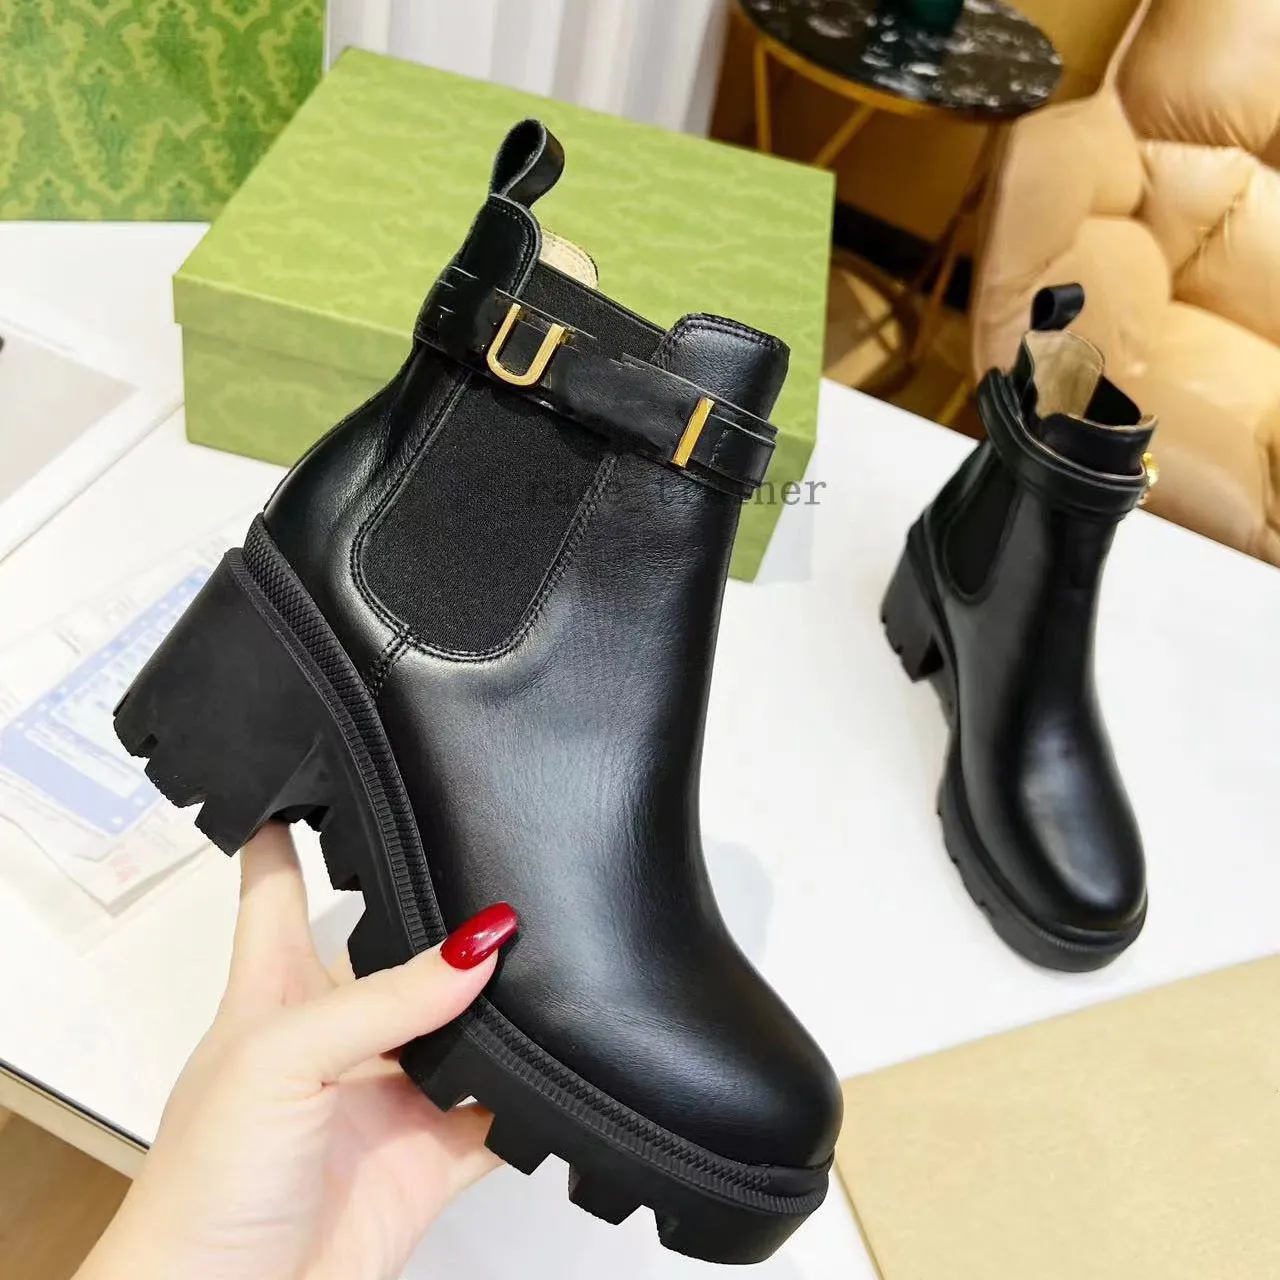 Letter buckle high heel Ankle Boots Full Grain Leather round toe side zipper block heel Fashion Boots Women's outdoor shoes luxury designer booties 34-42 1.25 04